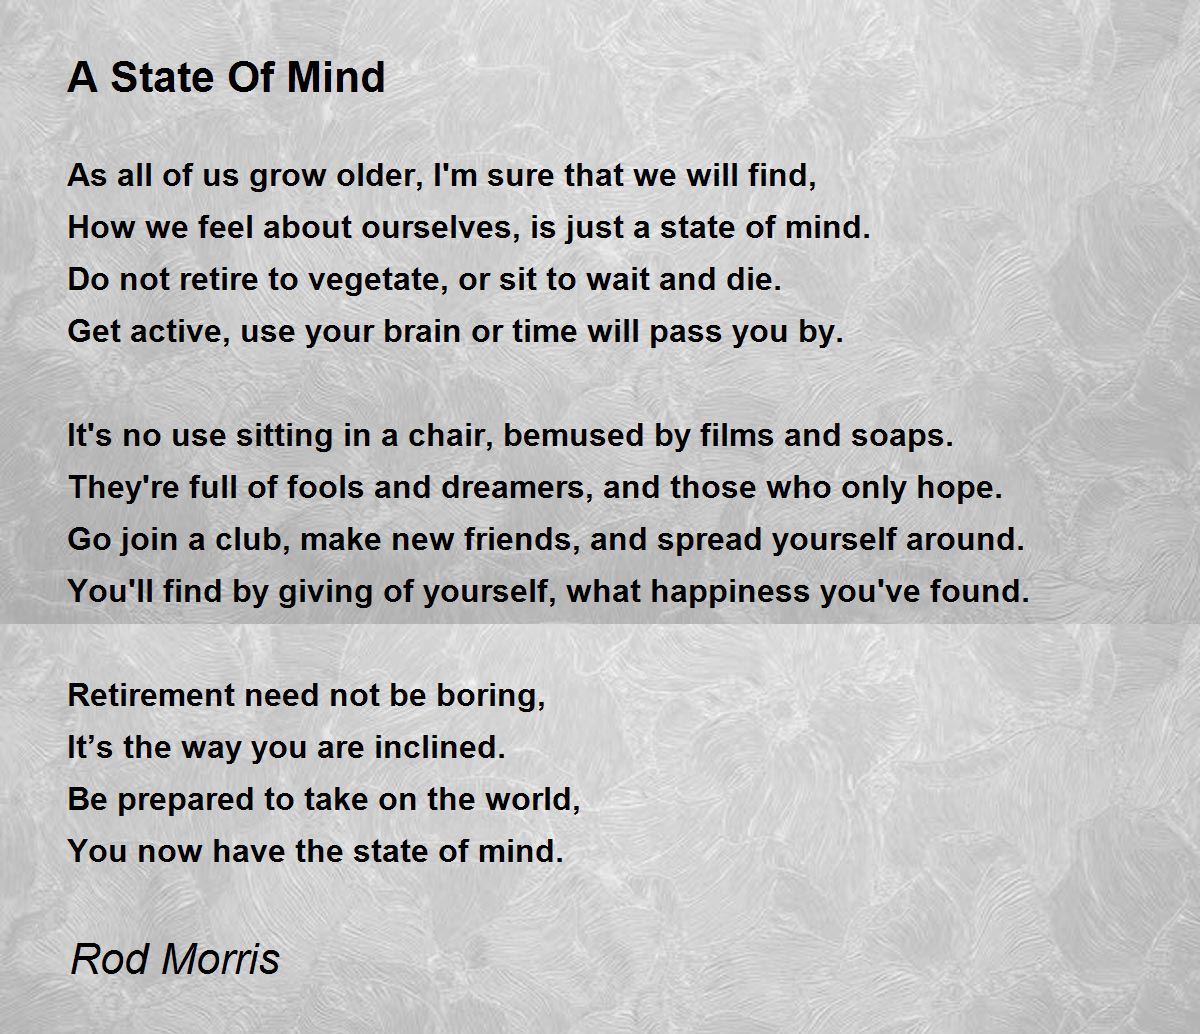 A State Of Mind - A State Of Mind Poem by Rod Morris